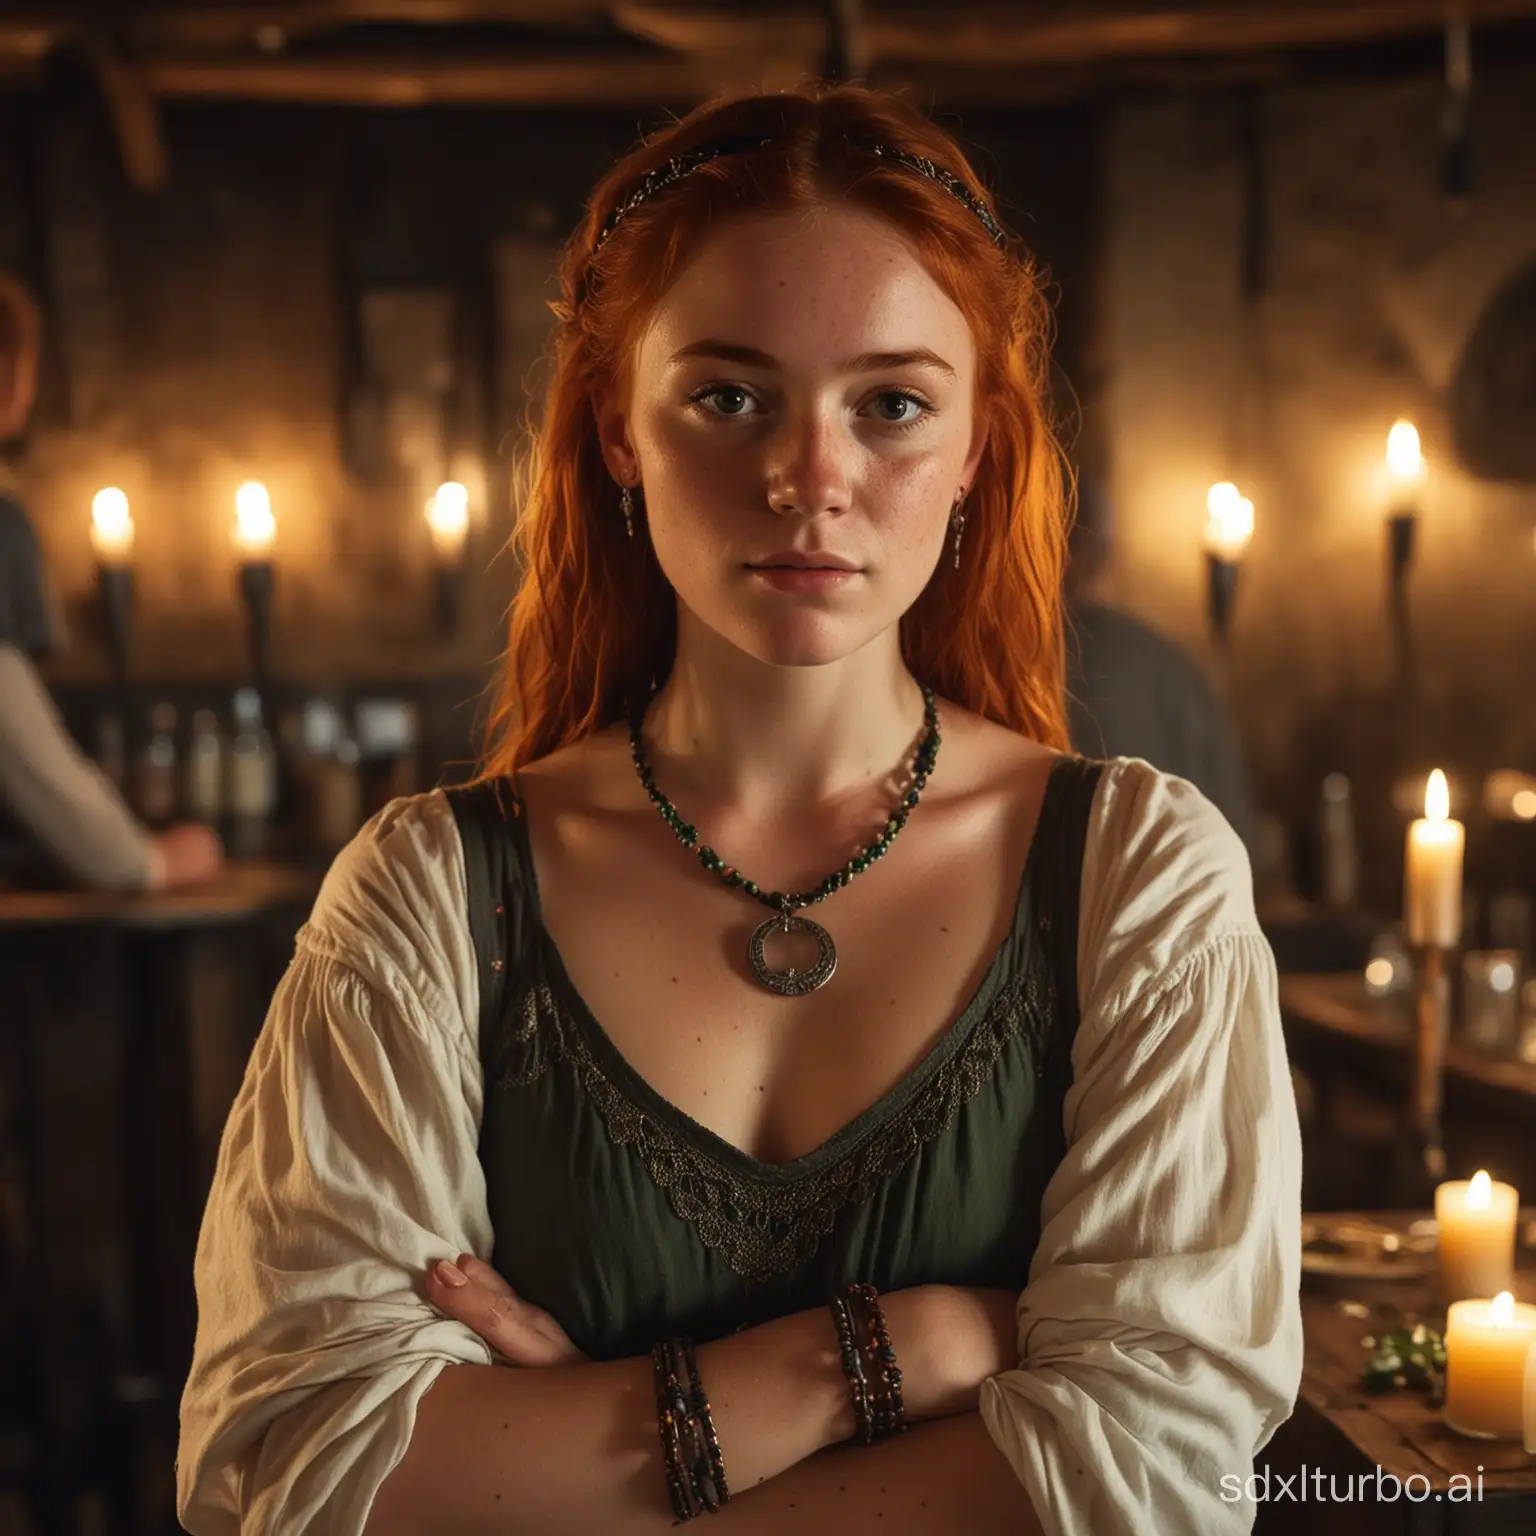 Portrait of teen redhead freckles Irish girl in crowded messy medieval pub. dressed in extremely low cut revealing small sagging breasts. Shaman like bracelets, necklaces, earrings. Revealed belly. Candle lights. thoughtful face.